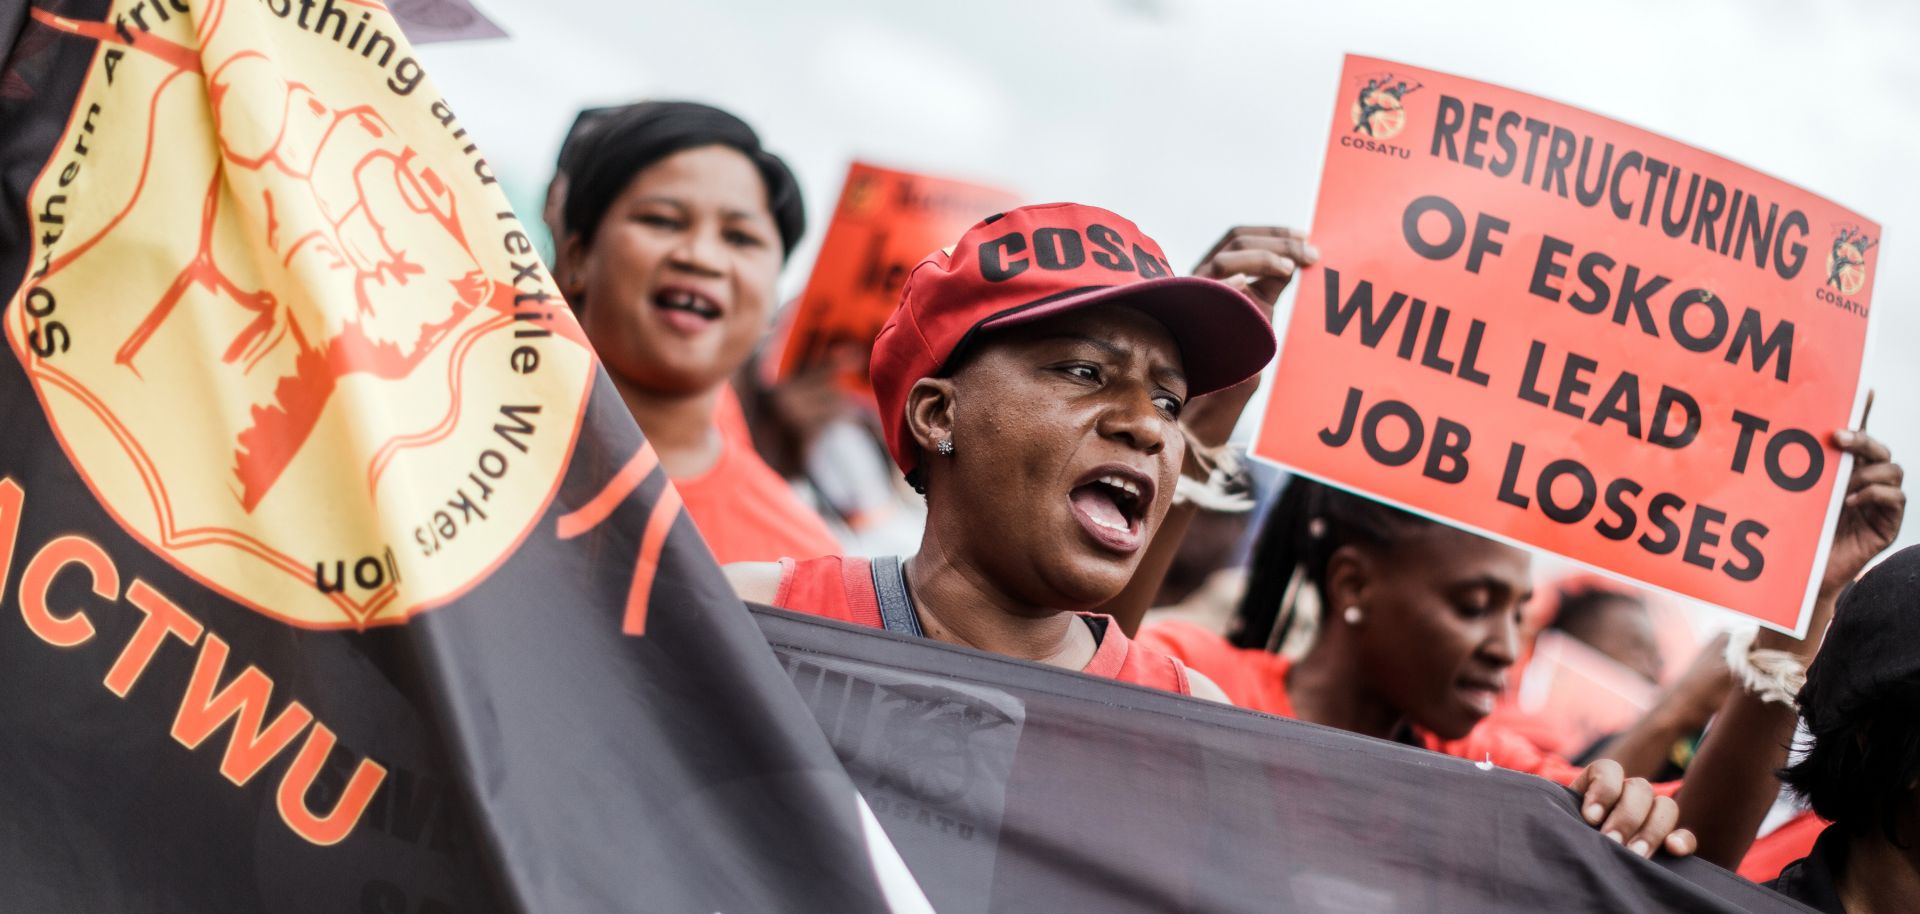 Members of the Congress of South African Trade Unions demonstrate on Feb. 13, 2019, as part of a nationwide strike to protest a possible restructuring on Eskom, South Africa's state-owned electric utility.